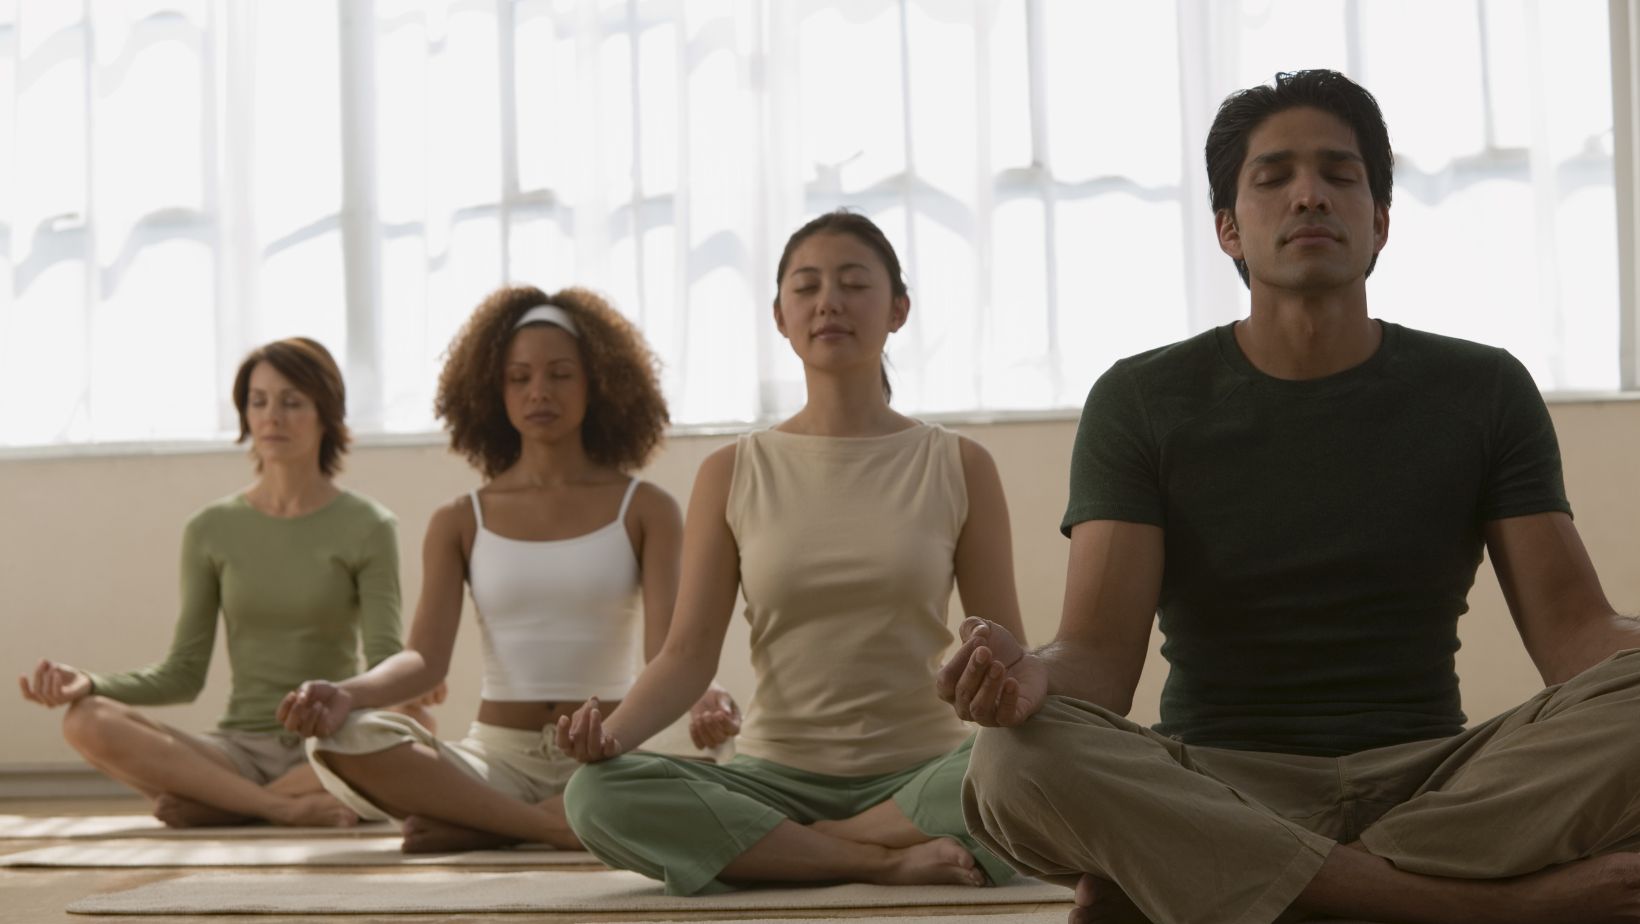 C&C Search Images on Recruitment London - Men and women in a group meditation or yoga class